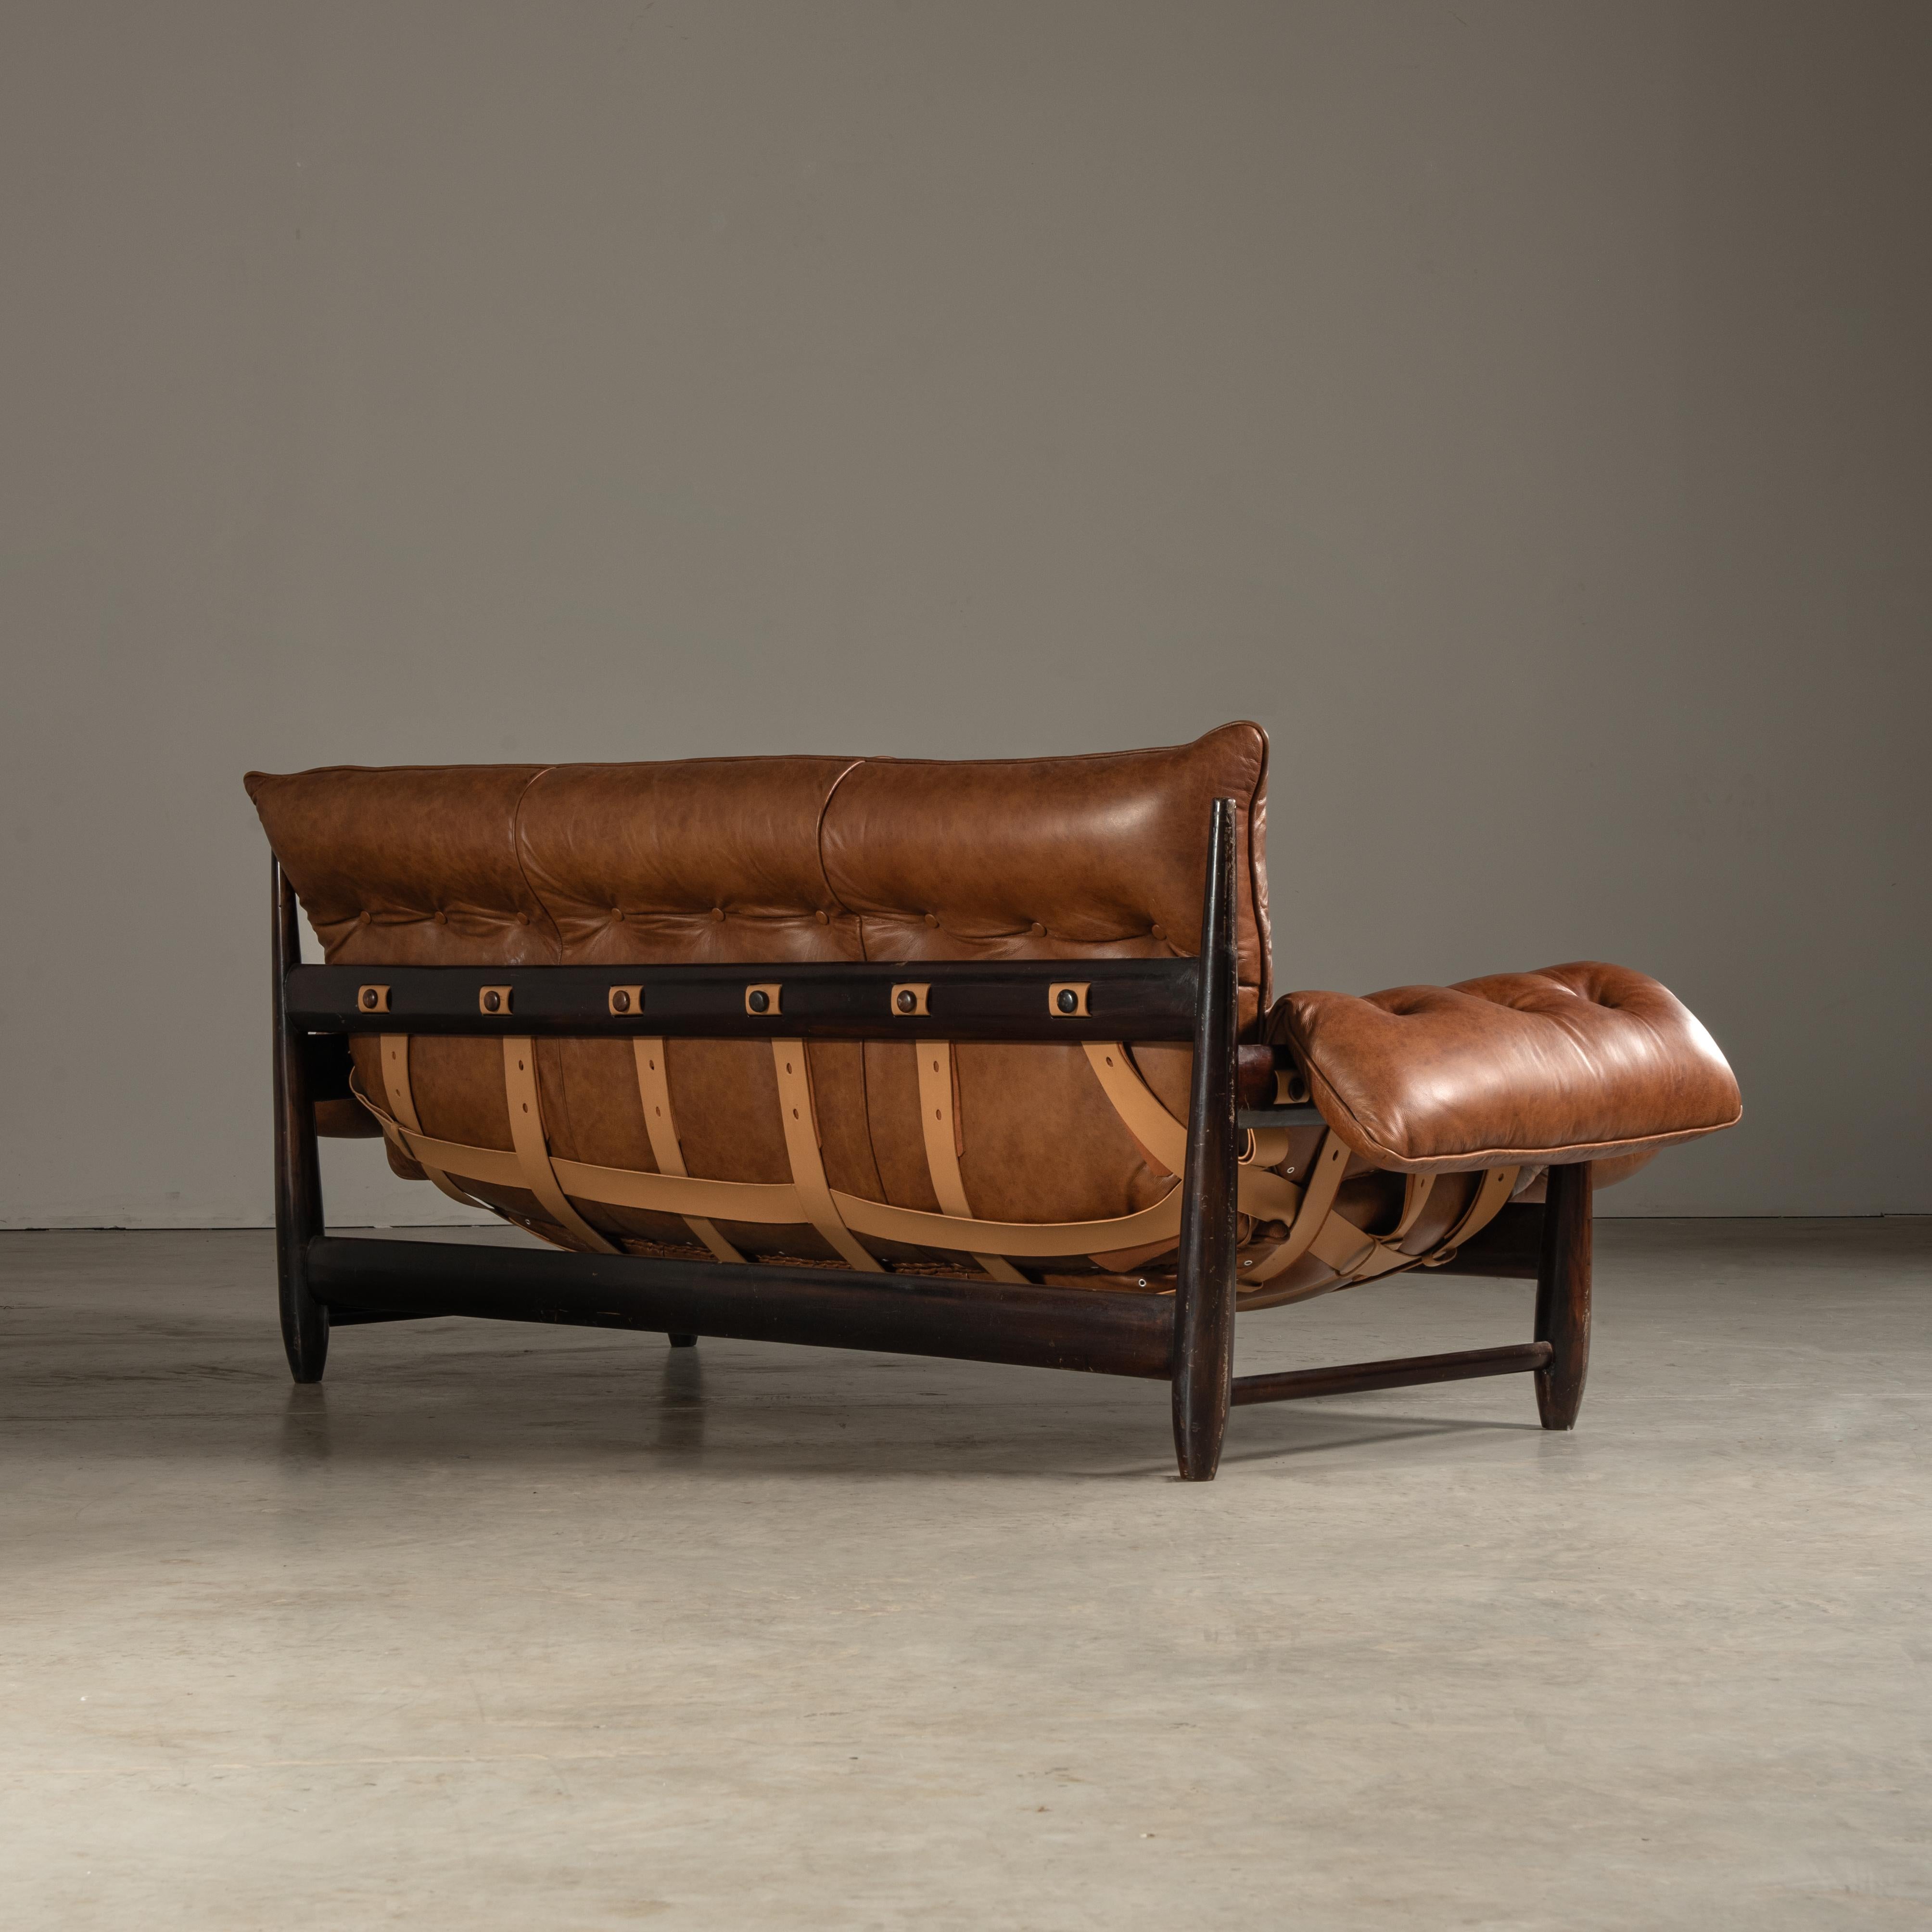 'Mole' Sofa in Leather, By Sergio Rodrigues, Brazilian Mid-Century Modern In Good Condition For Sale In Sao Paulo, SP